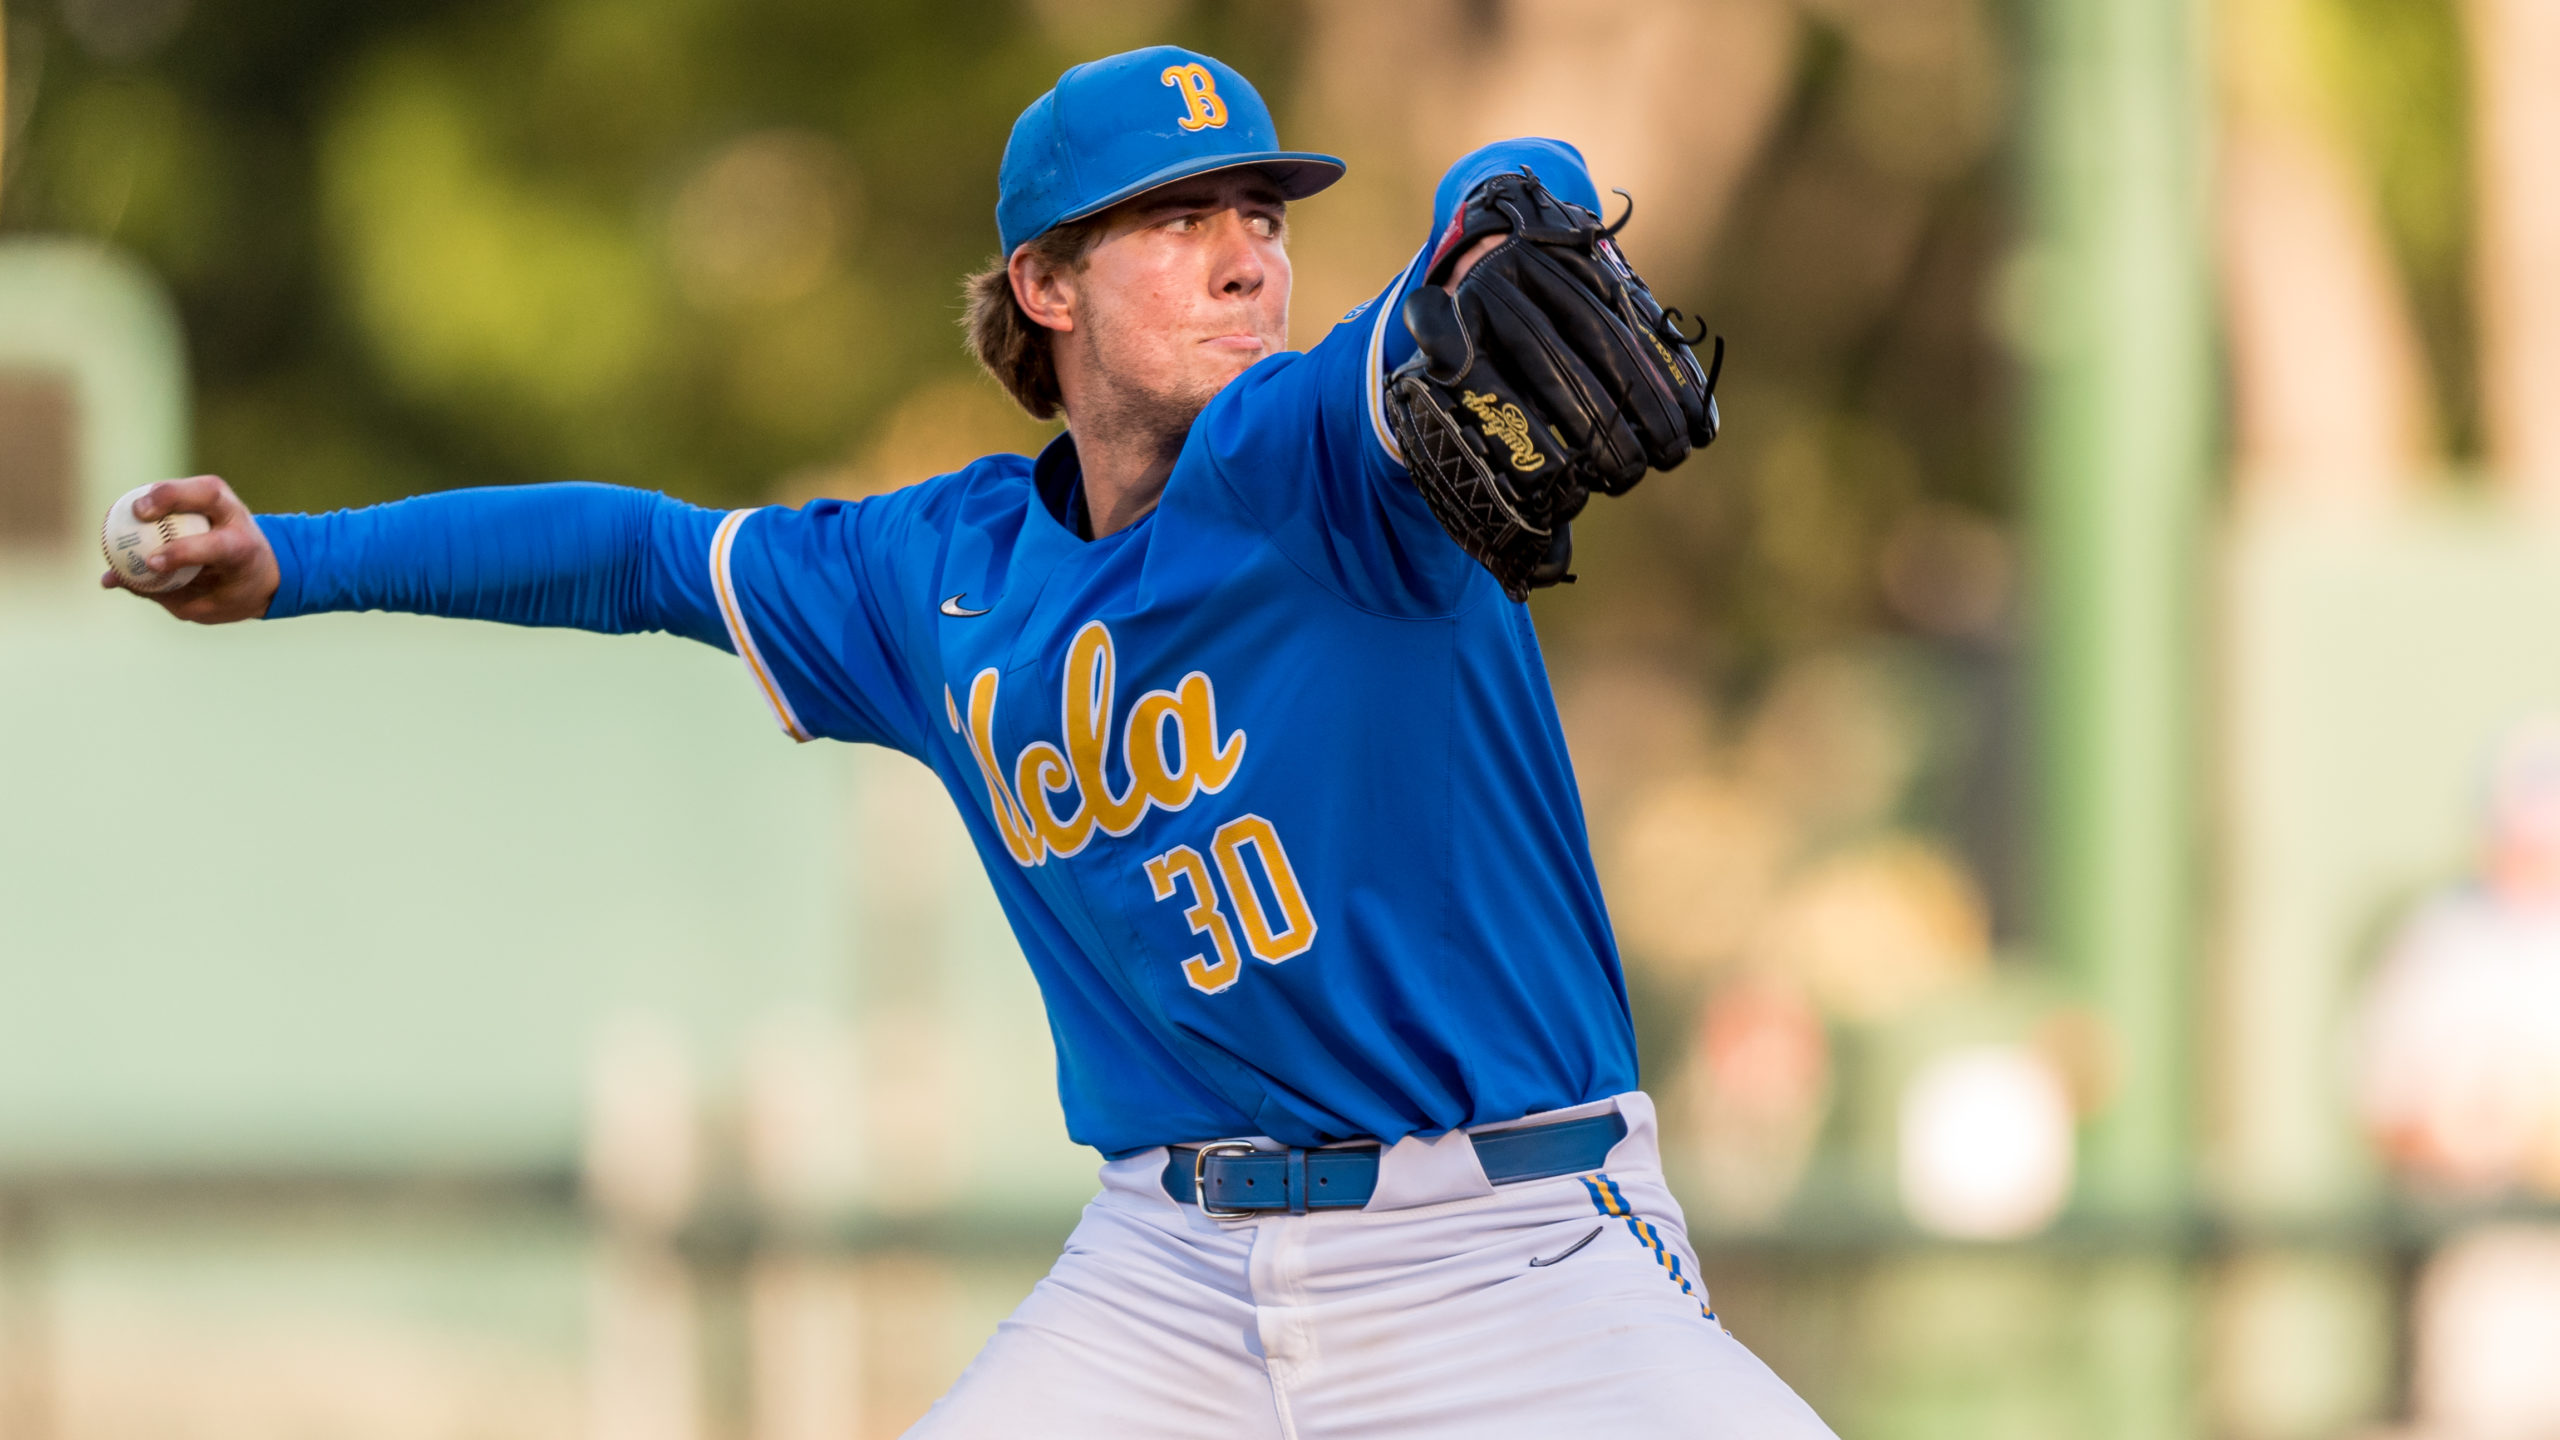 Alonzo Tredwell eager to pitch in starting rotation - Baseball Prospect  Journal